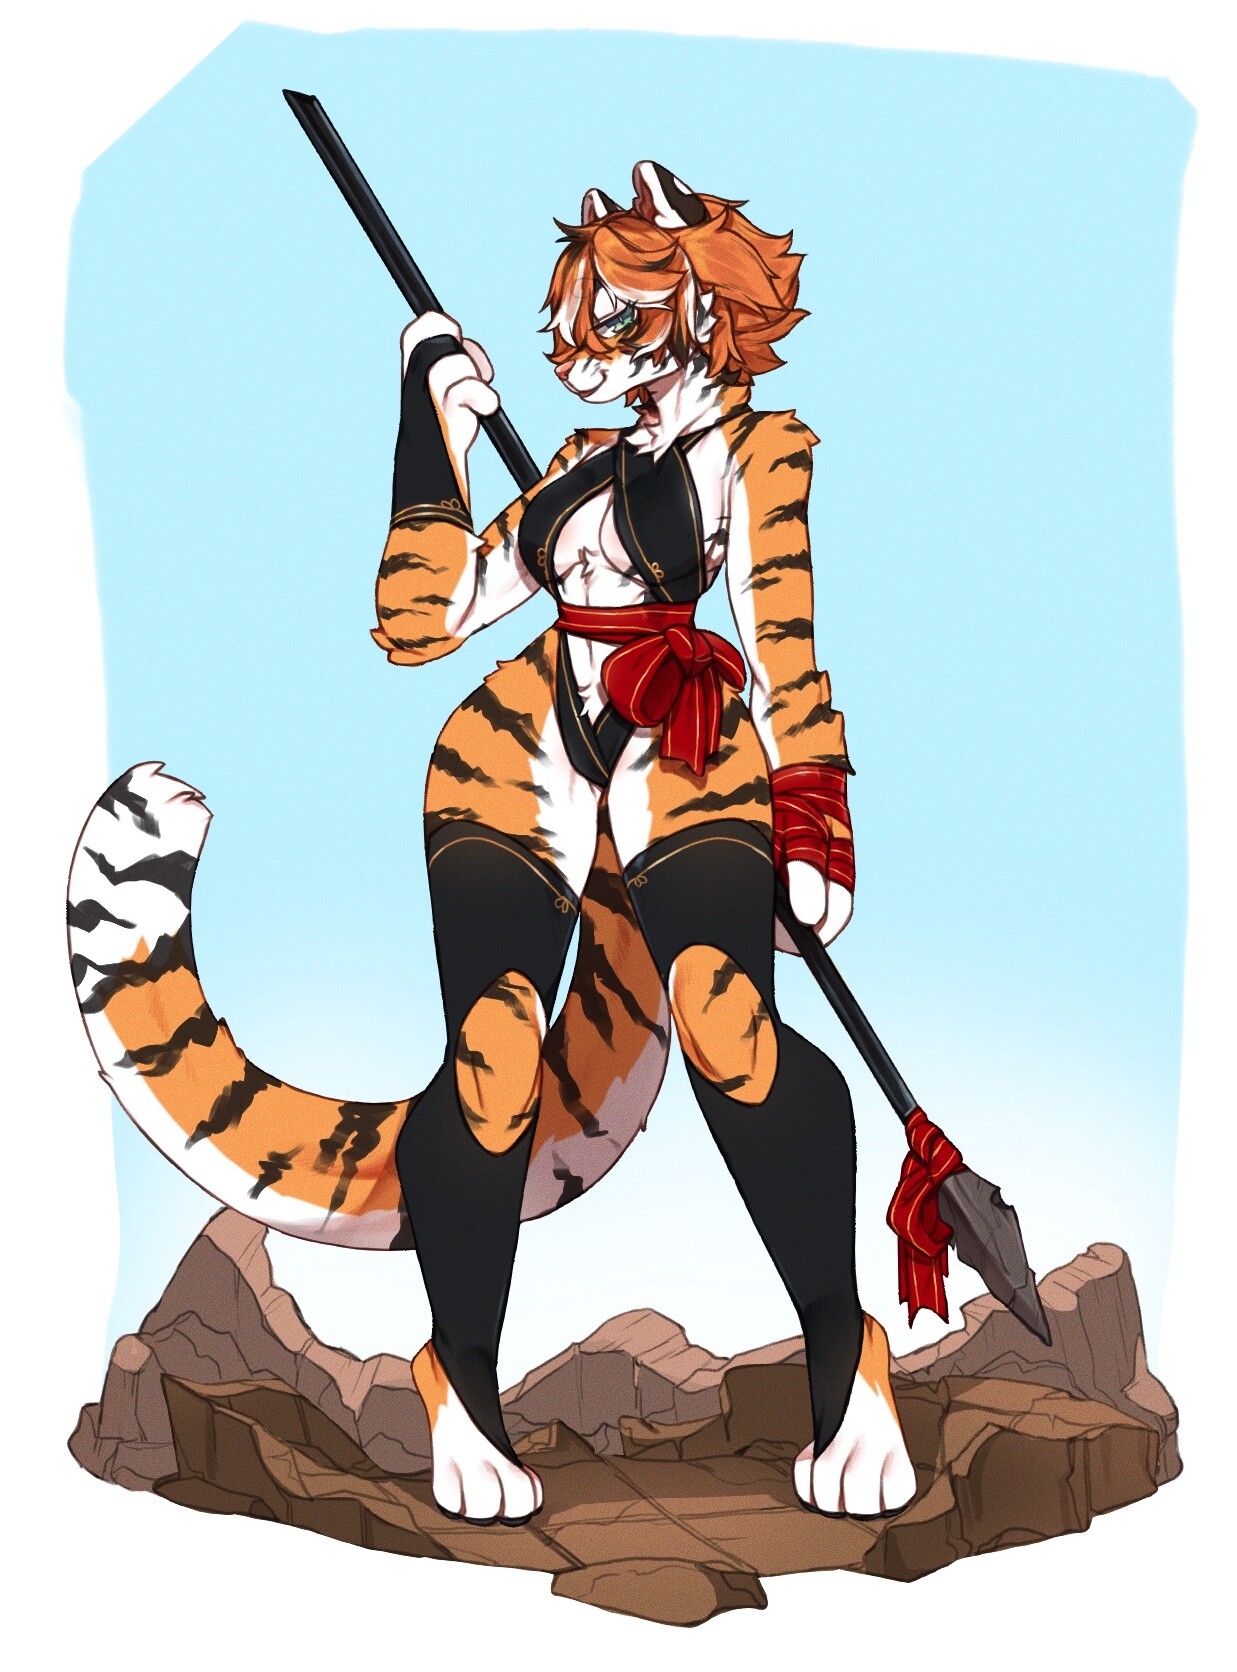 Year of the tiger by Puni Paws. 